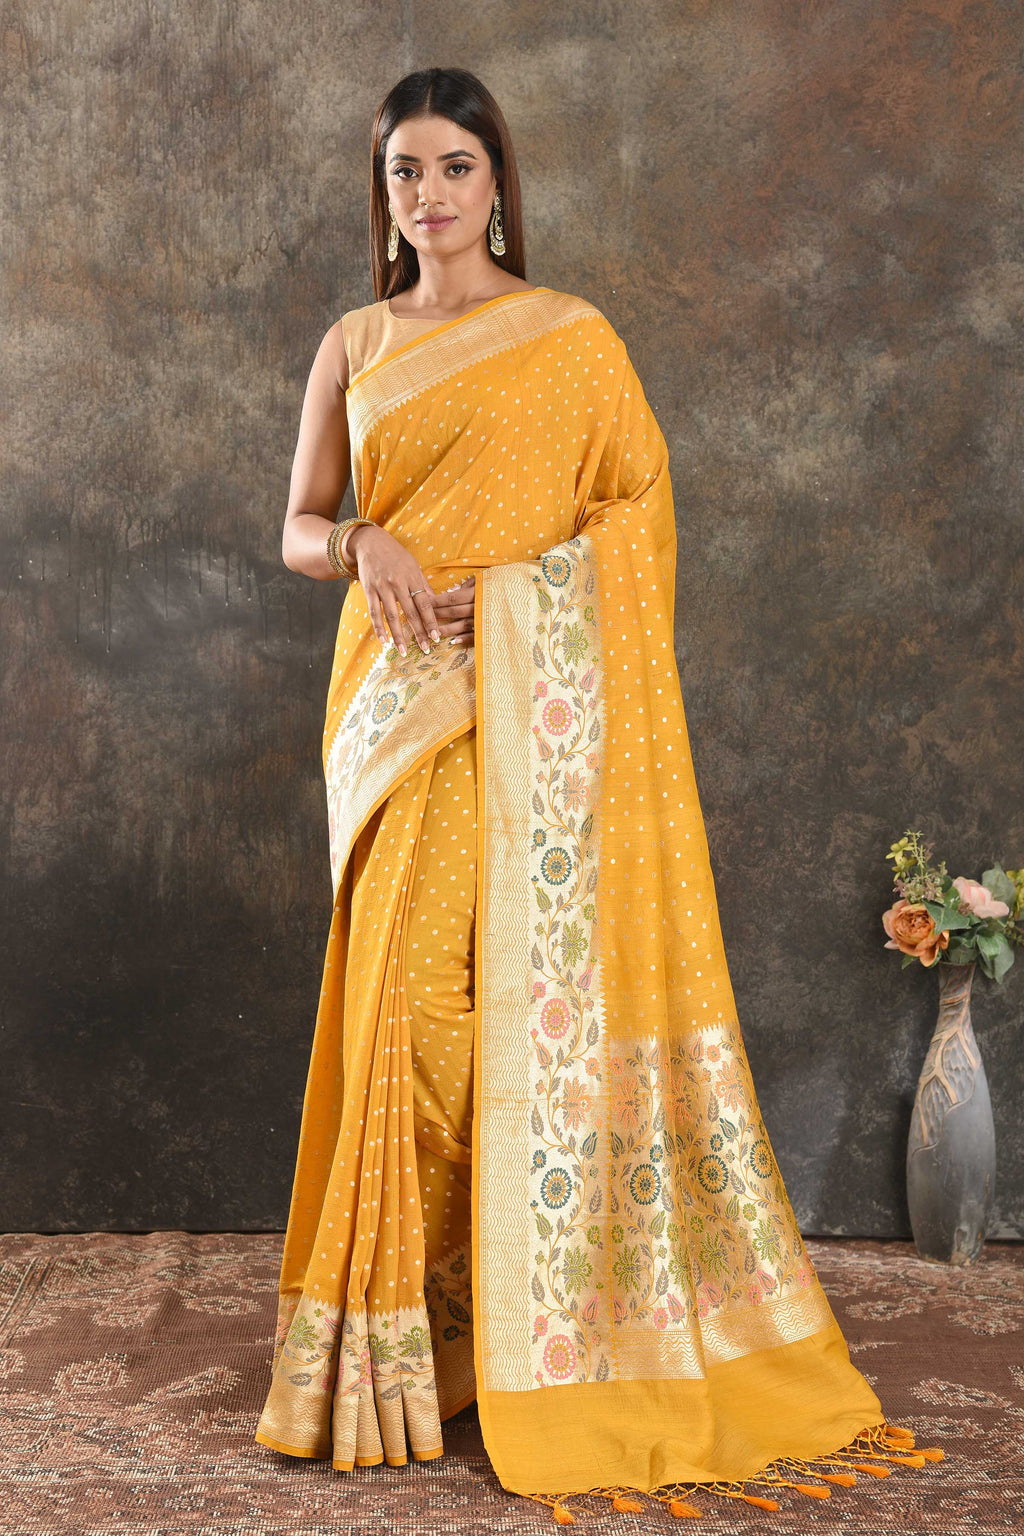 Buy beautiful mango yellow tussar Banarasi sari online in USA with floral zari border. Be vision of elegance on special occasions in exquisite designer sarees, handwoven sarees, georgette sarees, embroidered sarees, Banarasi saree, pure silk saris, tussar sarees from Pure Elegance Indian saree store in USA.-full view